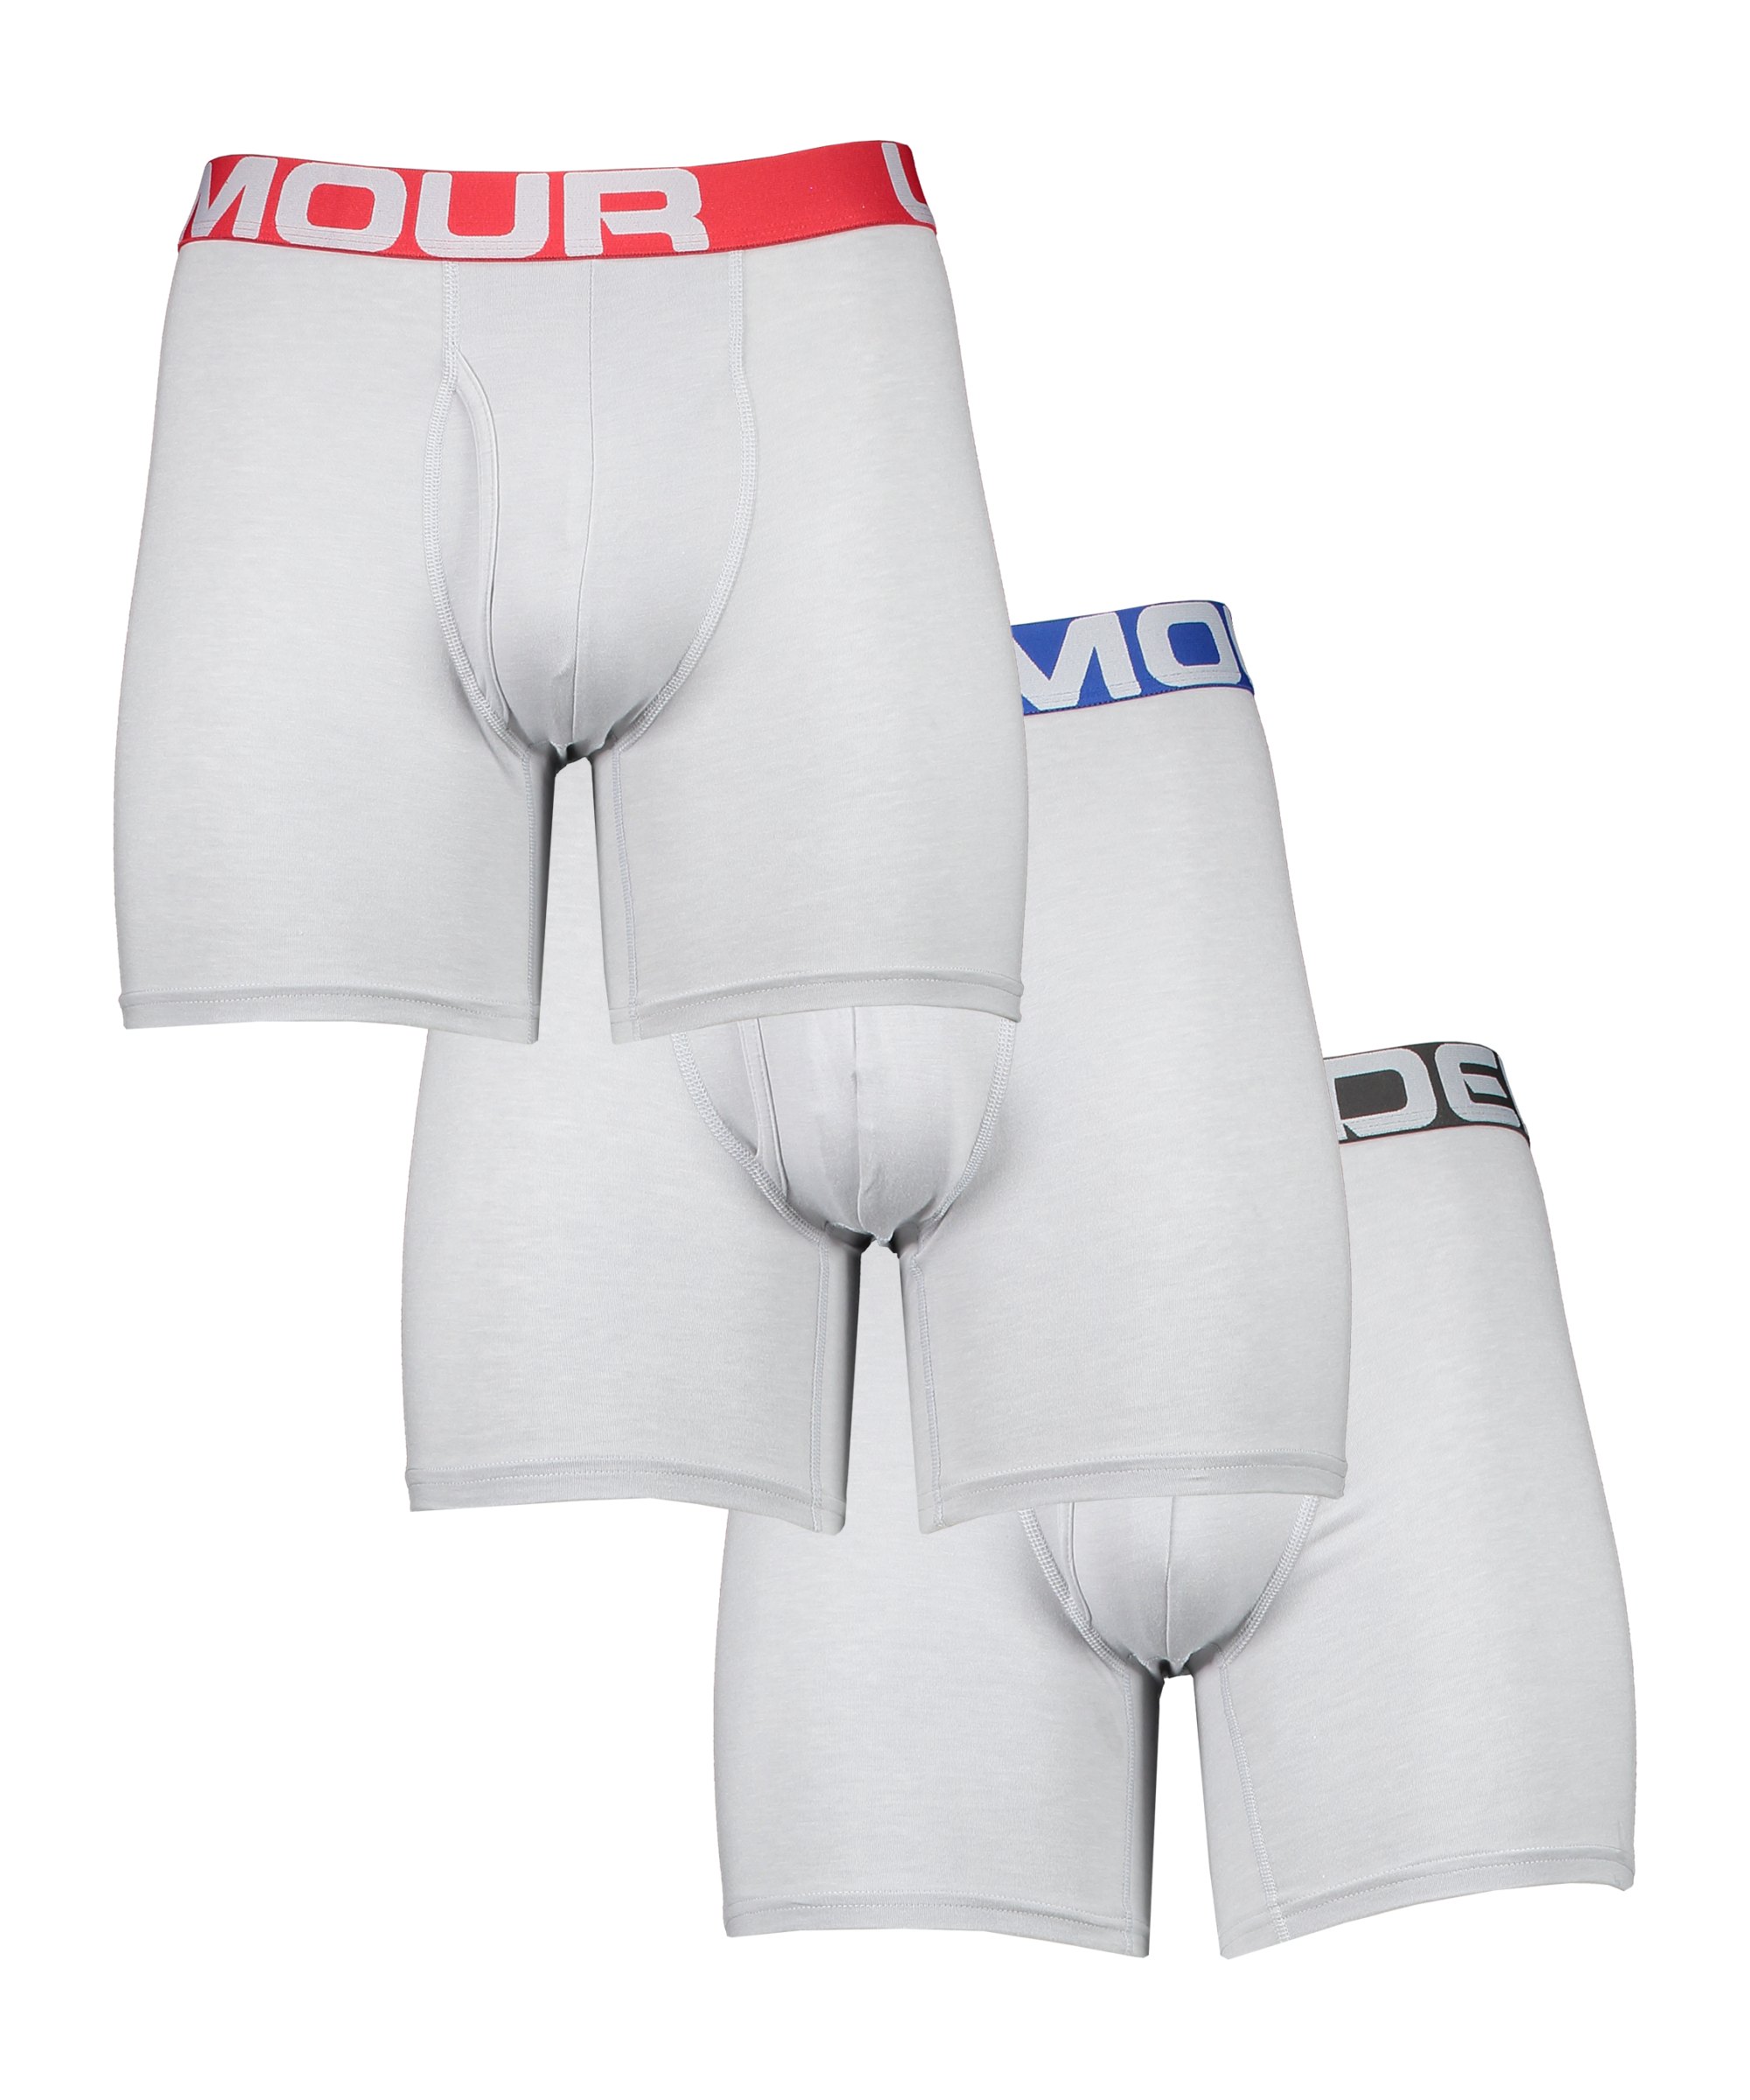 Under Armour Charged Boxer 6in 3er Pack Grau F011 - grau